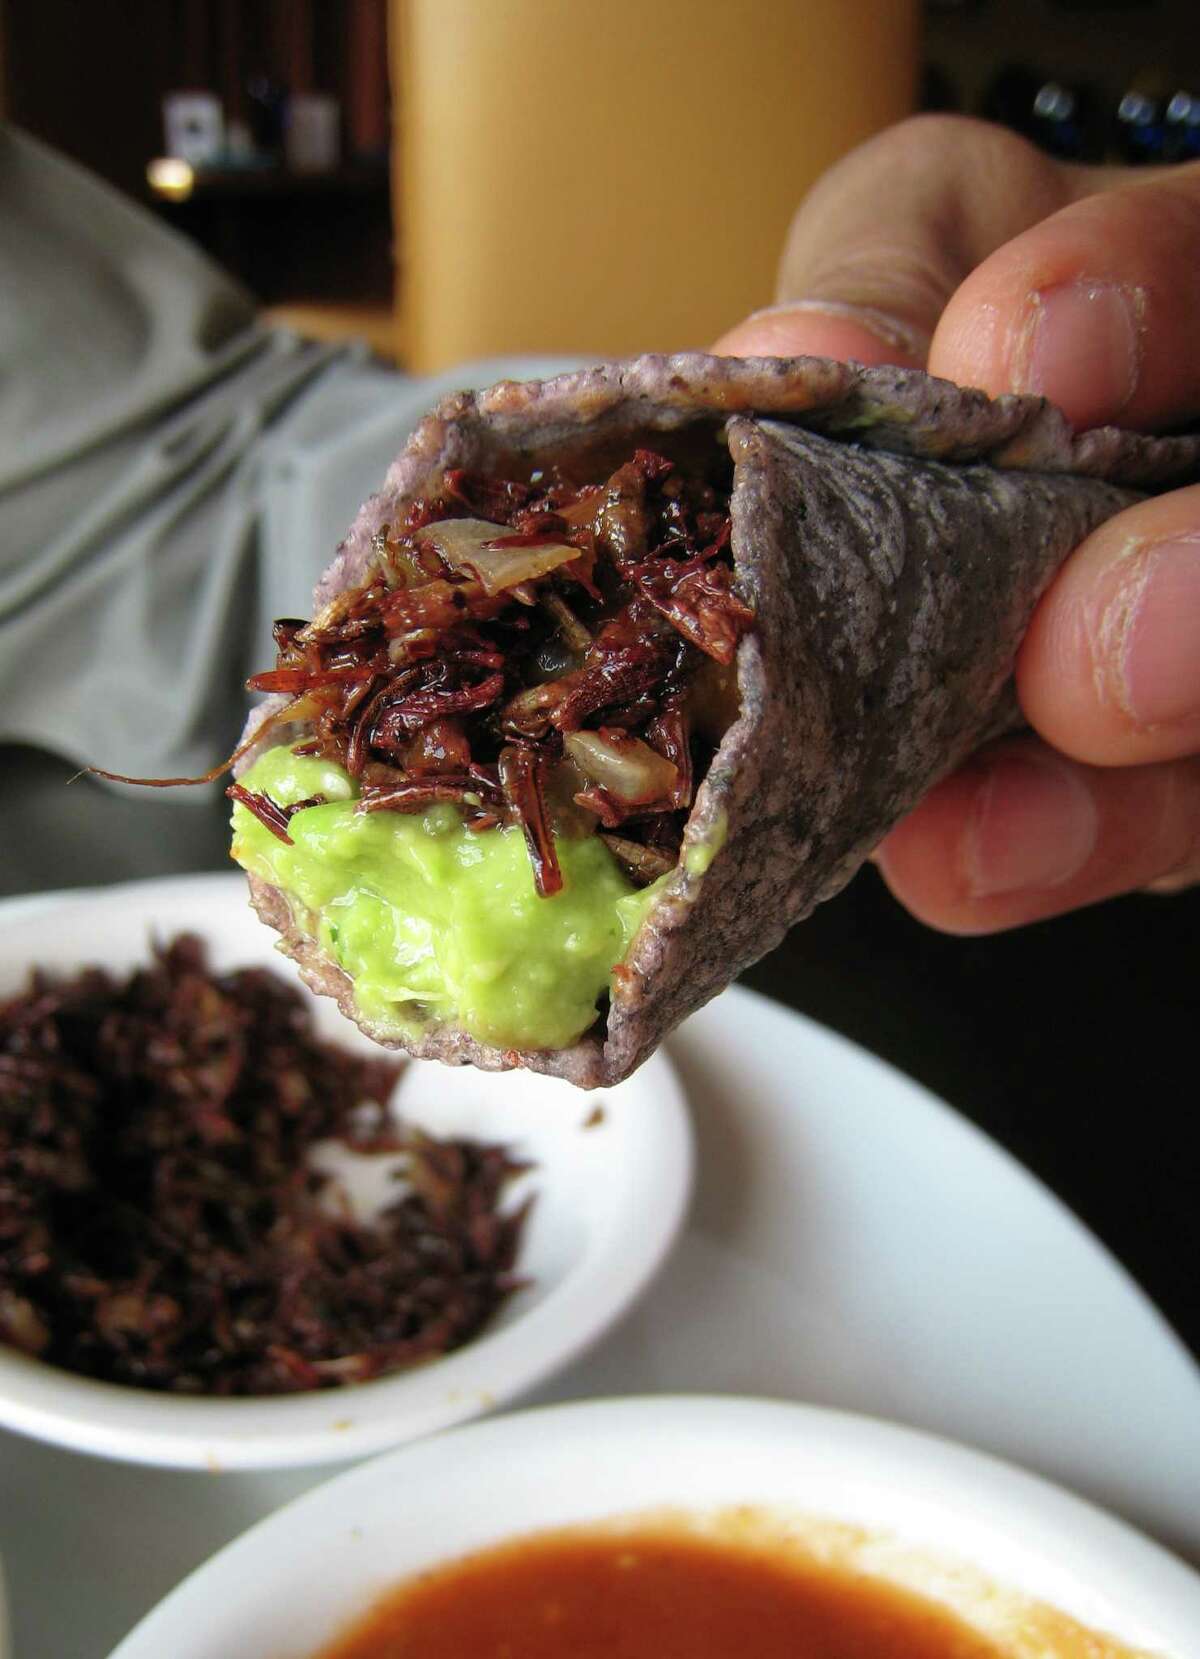 The menu at Hugo's now includes chapulines, grasshoppers served with guacamole, tortillas and sauce.